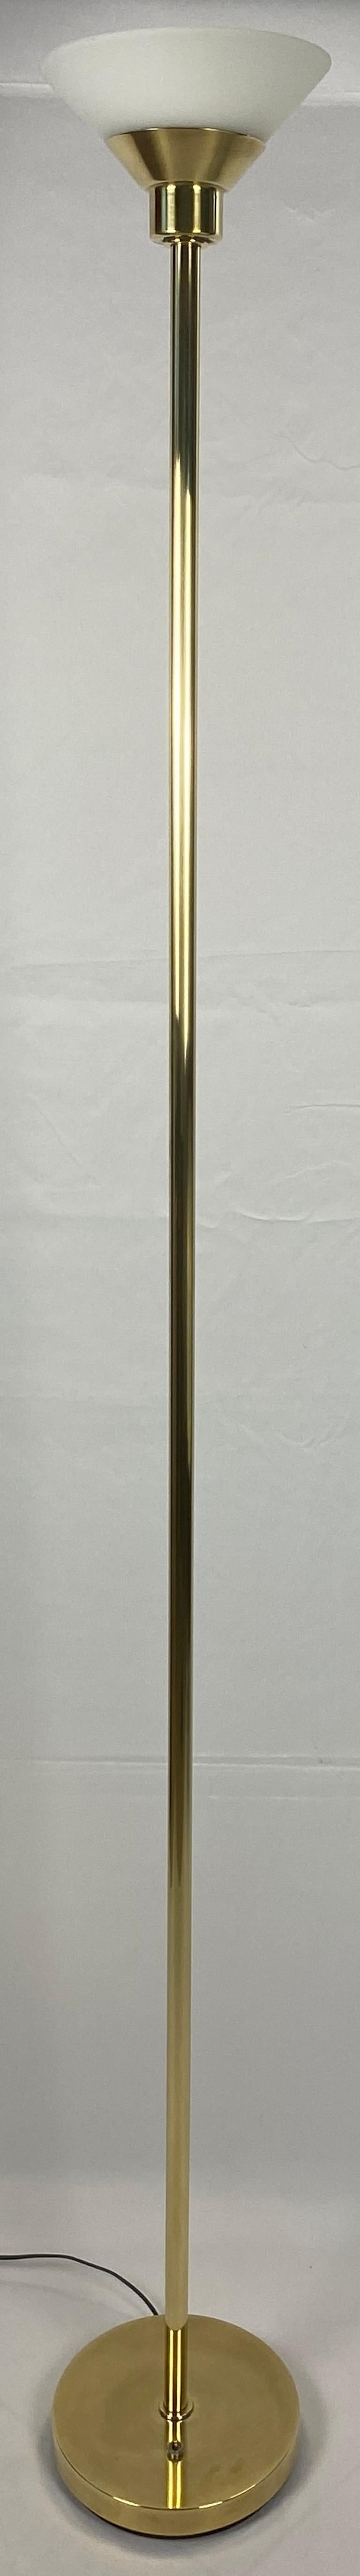 Koch & Lowy Brass Floor Lamp with Glass Shade For Sale 4